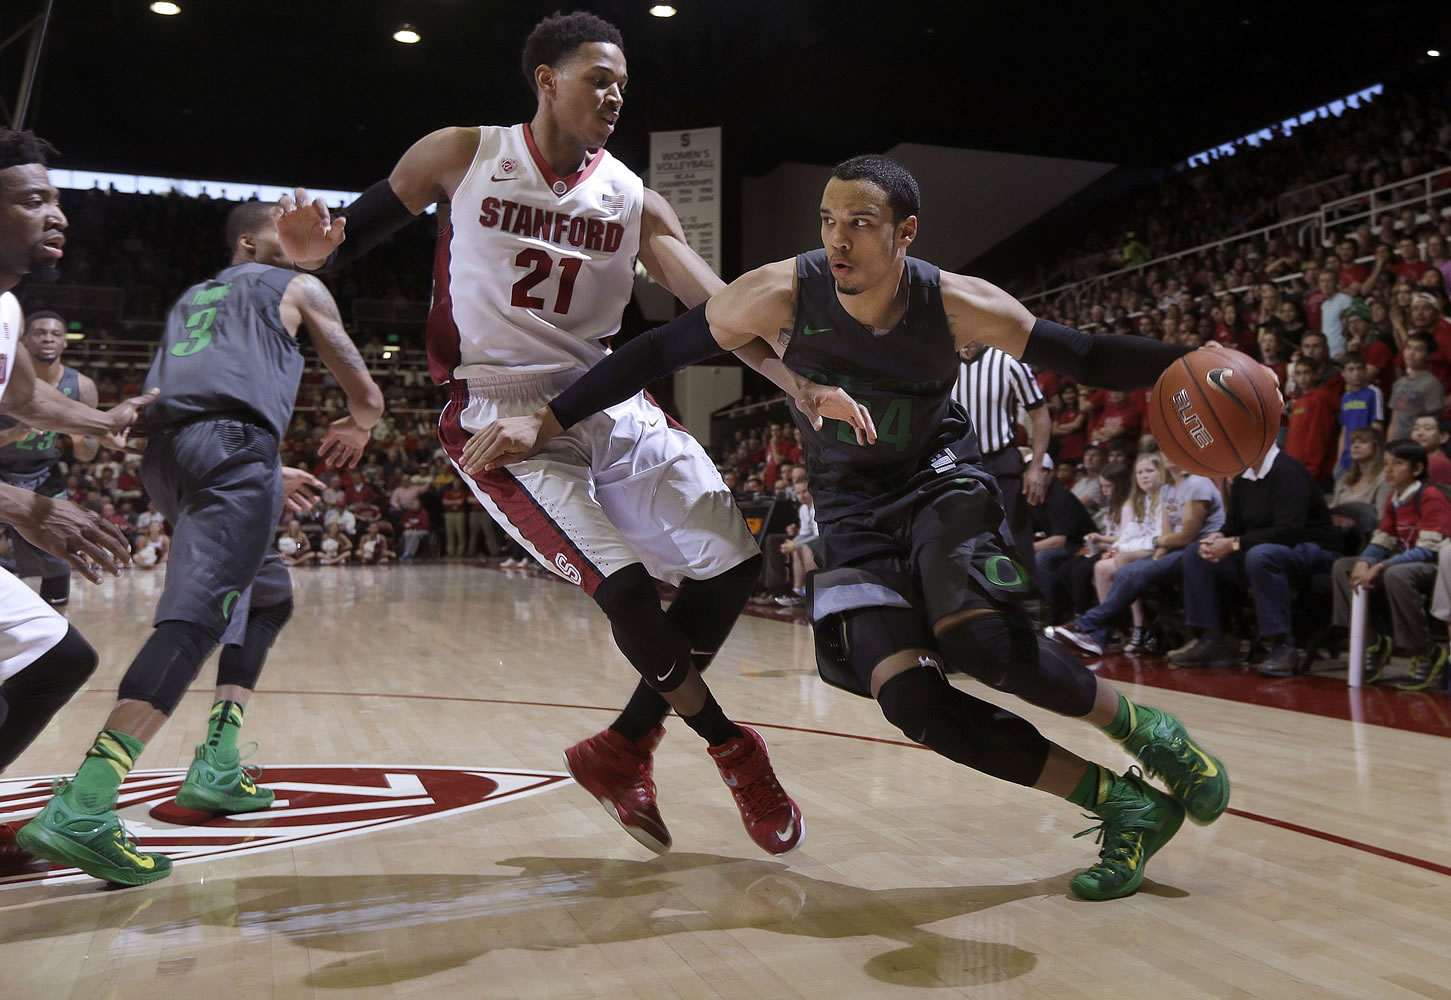 Oregon's Dillon Brooks (24) dribbles against Stanford's Anthony Brown (21) during the second half of an NCAA college basketball game in Stanford, Calif., Sunday, March 1, 2015. Oregon won 73-70.